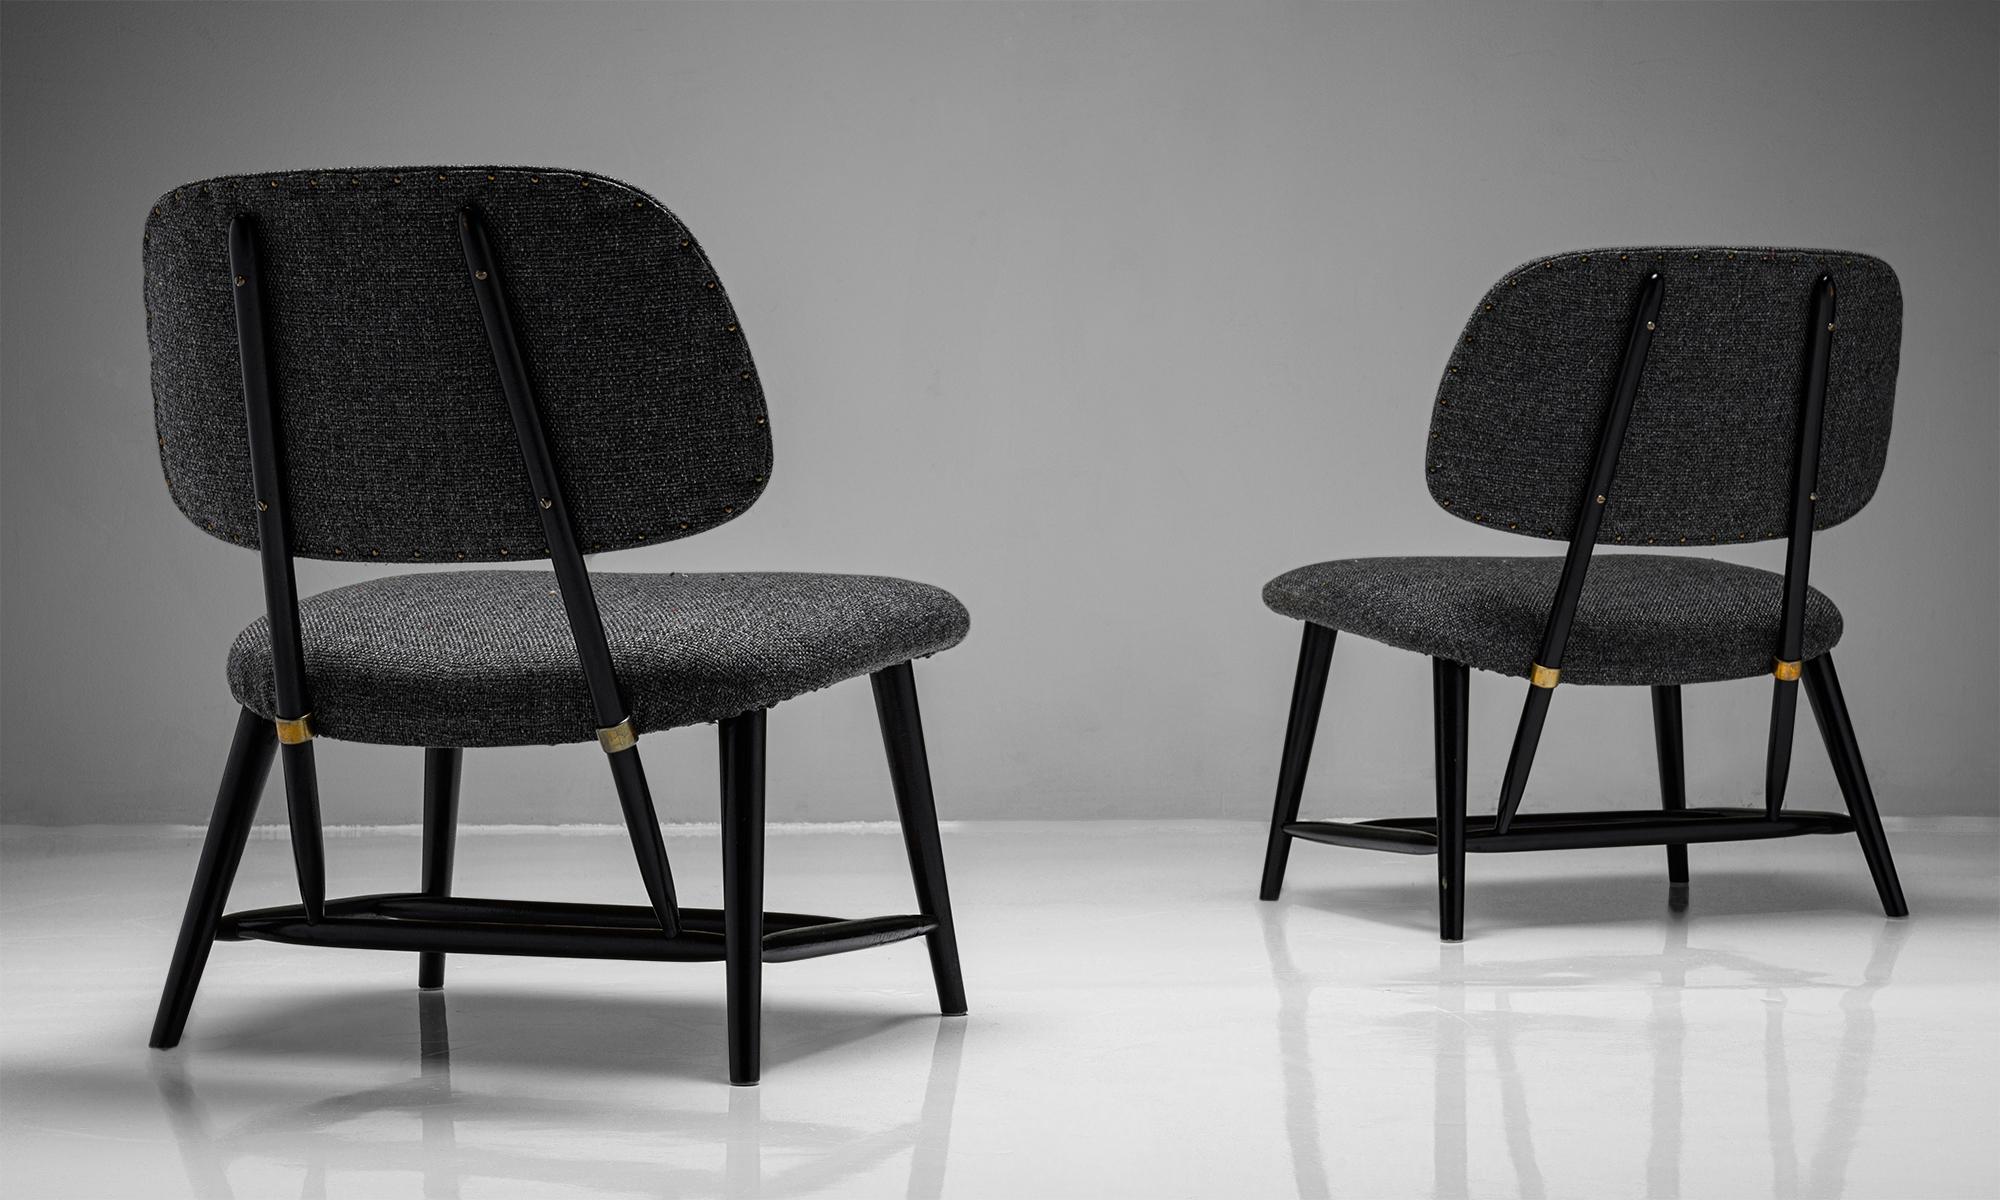 Pair of “TeVe” chairs by Alf Svensson

Sweden circa 1950

Ebonised wooden Frame with brass details, in original black tweed wool fabric.